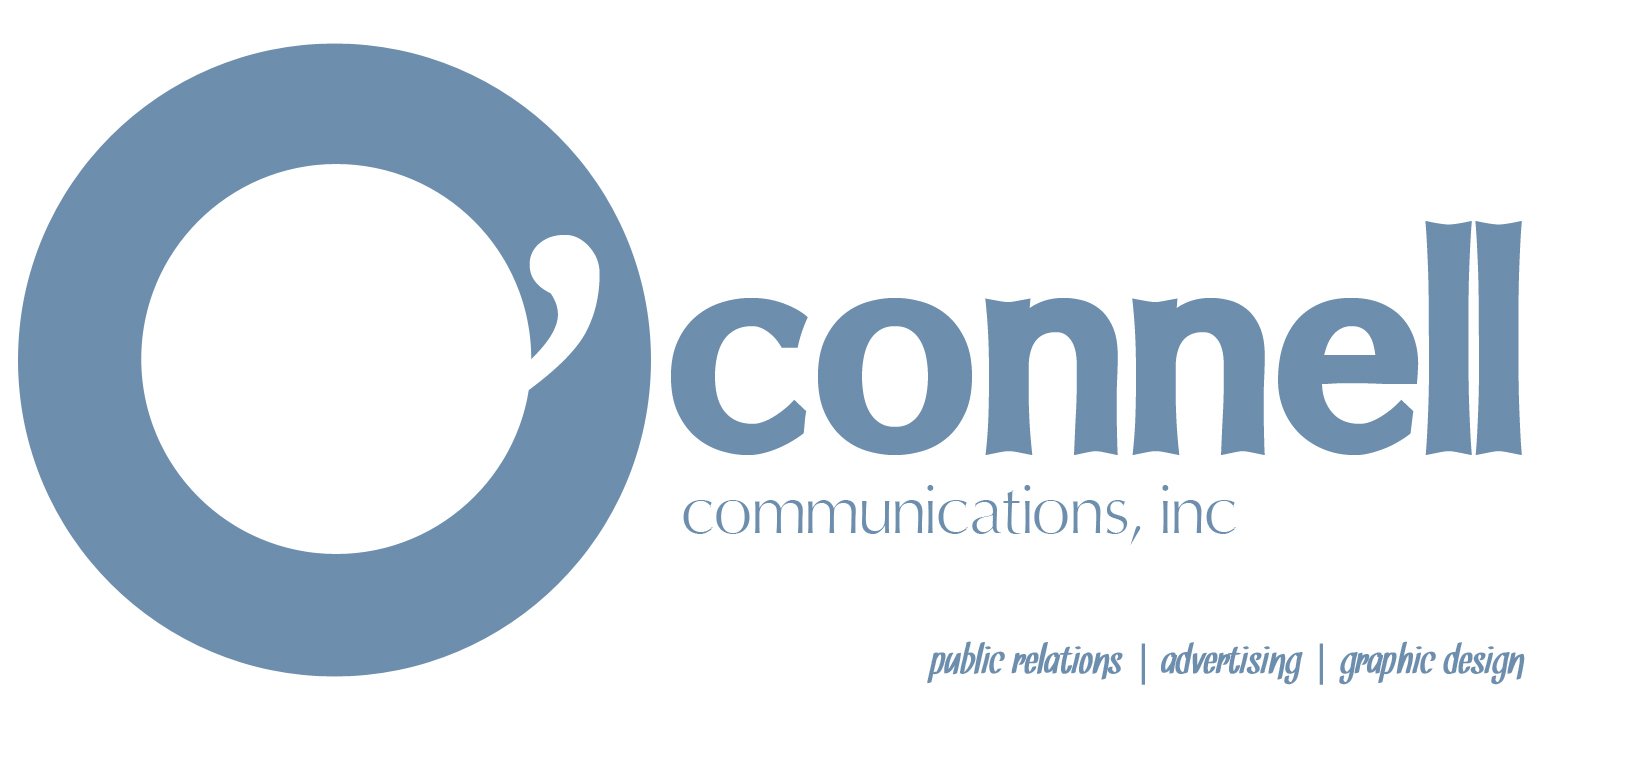 O'Connell Communications, Inc